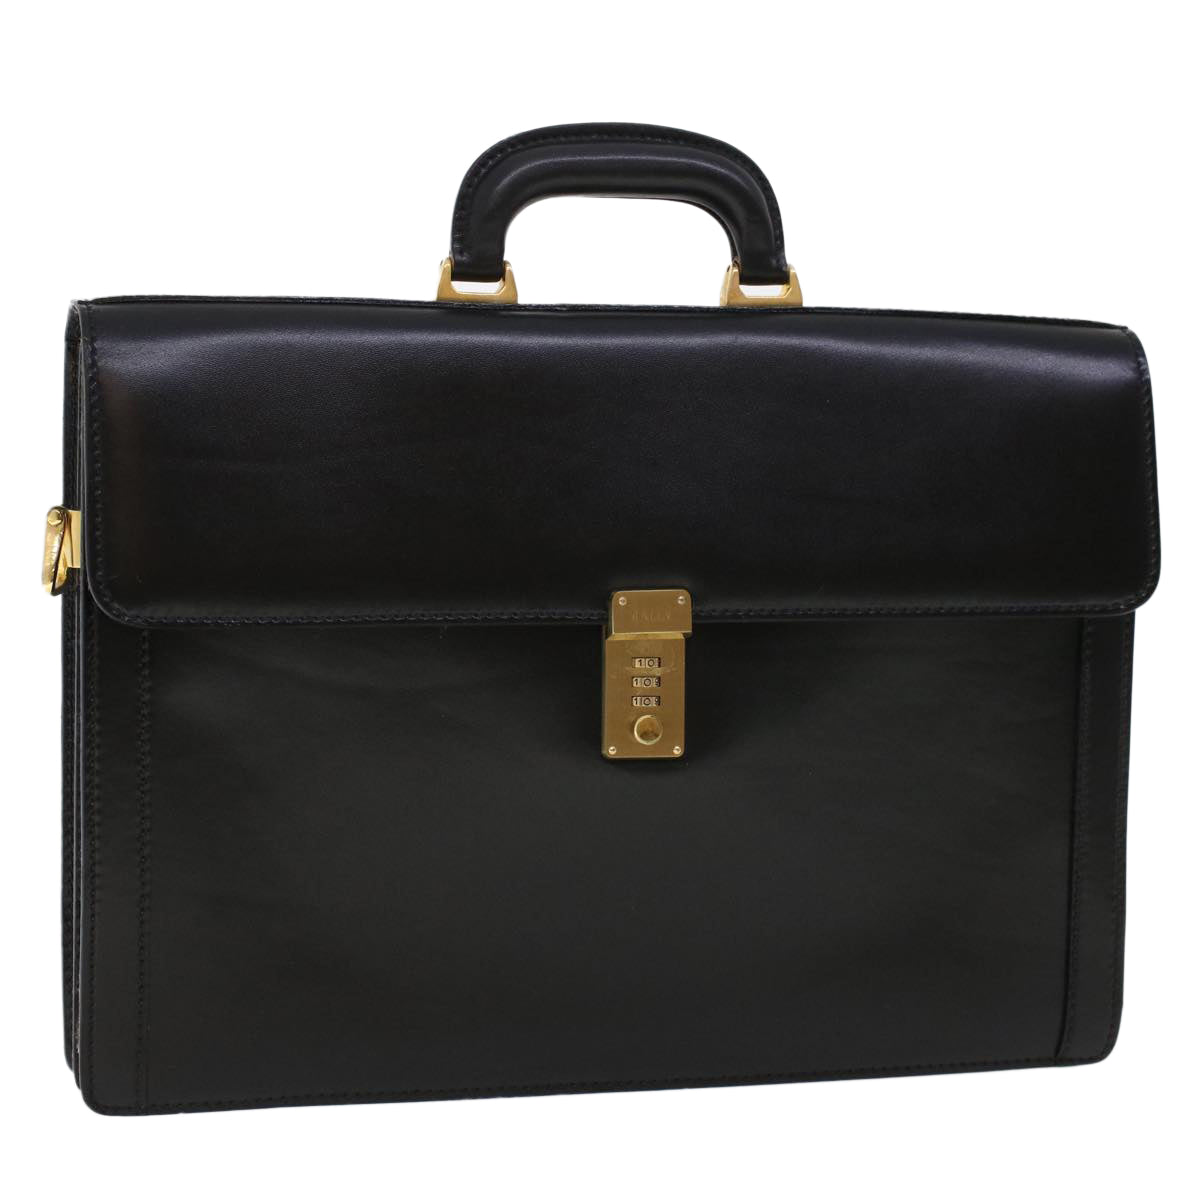 BALLY Business Bag Leather 2way Black Auth bs5682